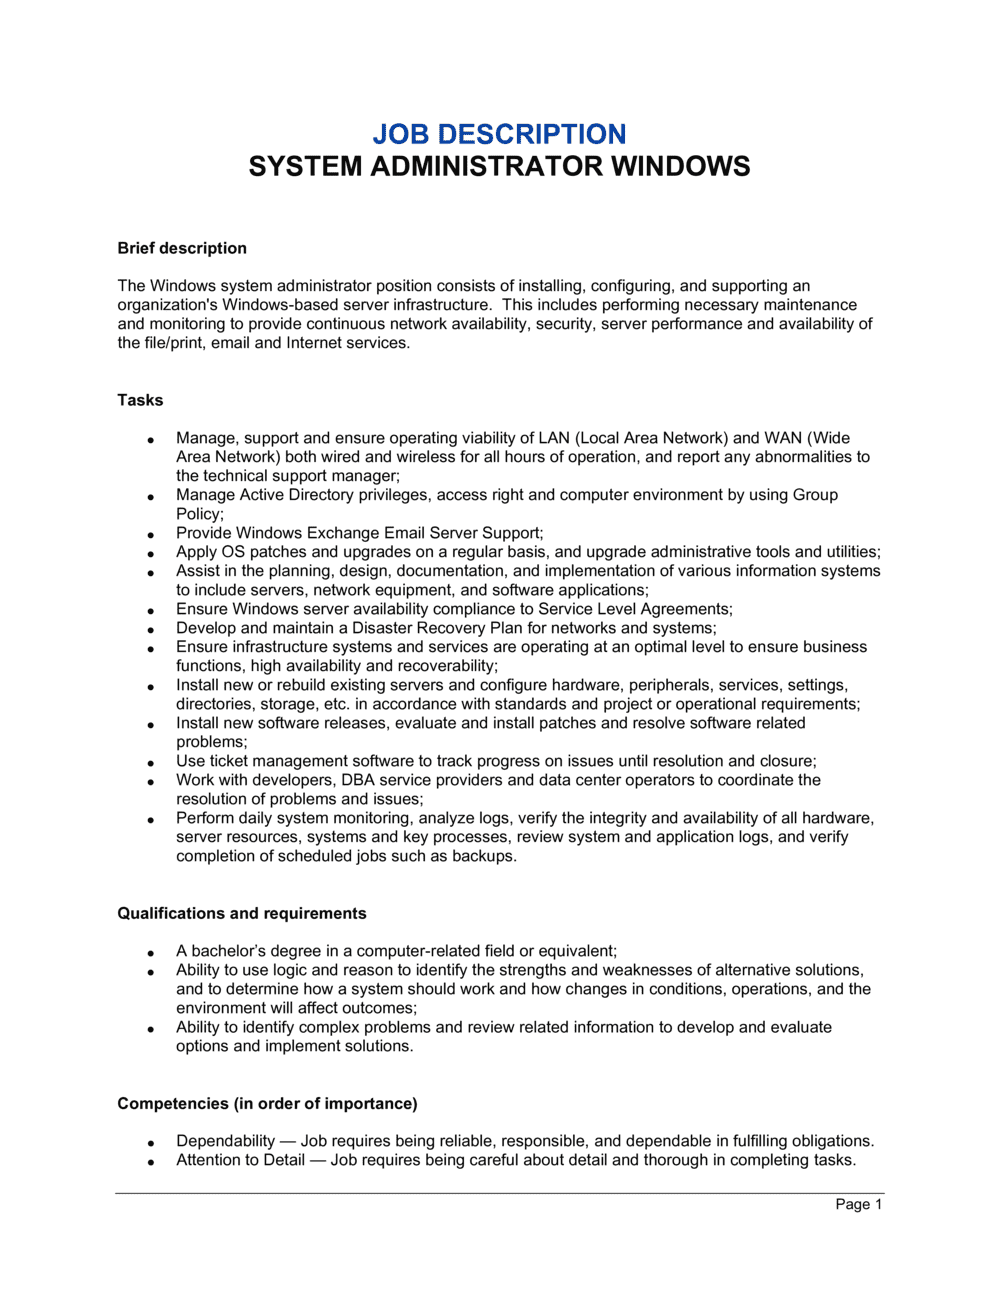 system-administrator-windows-job-description-template-by-business-in